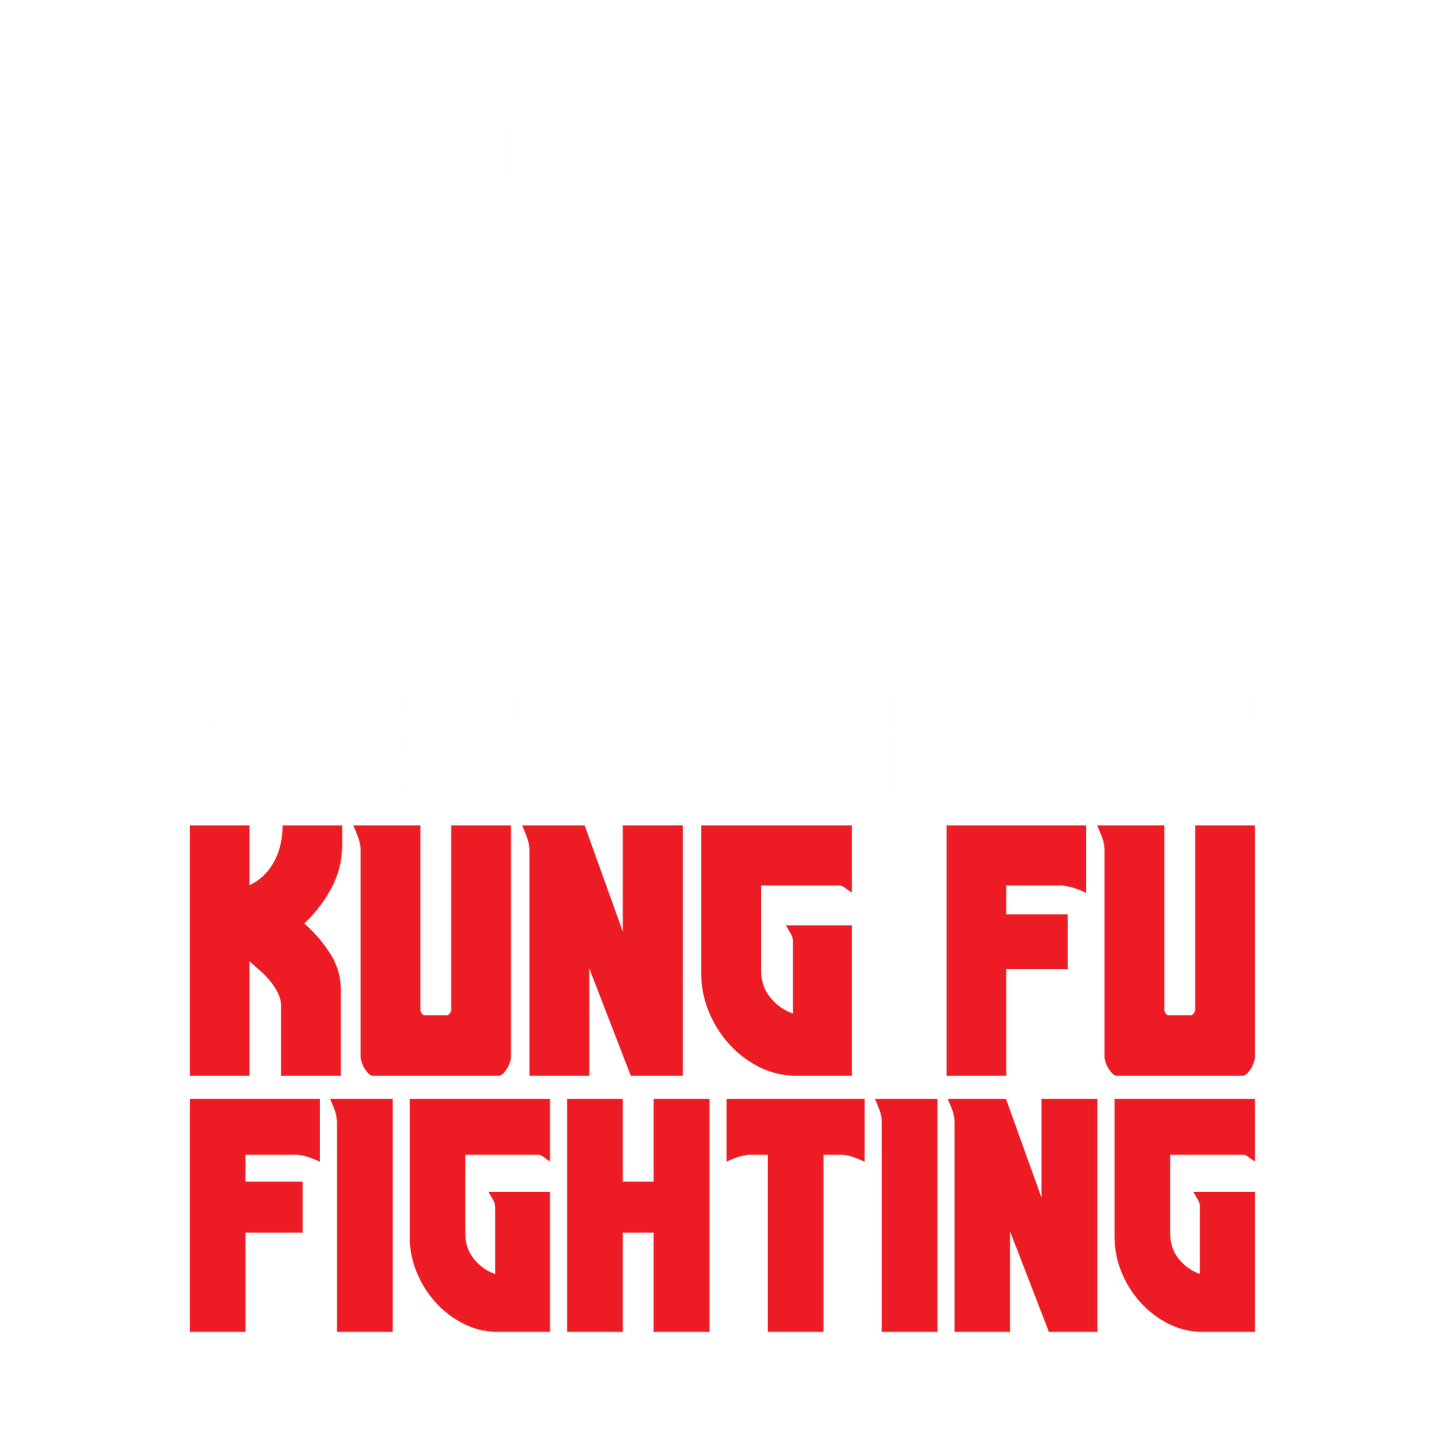 Every Bunny was Kung Fu Fighting